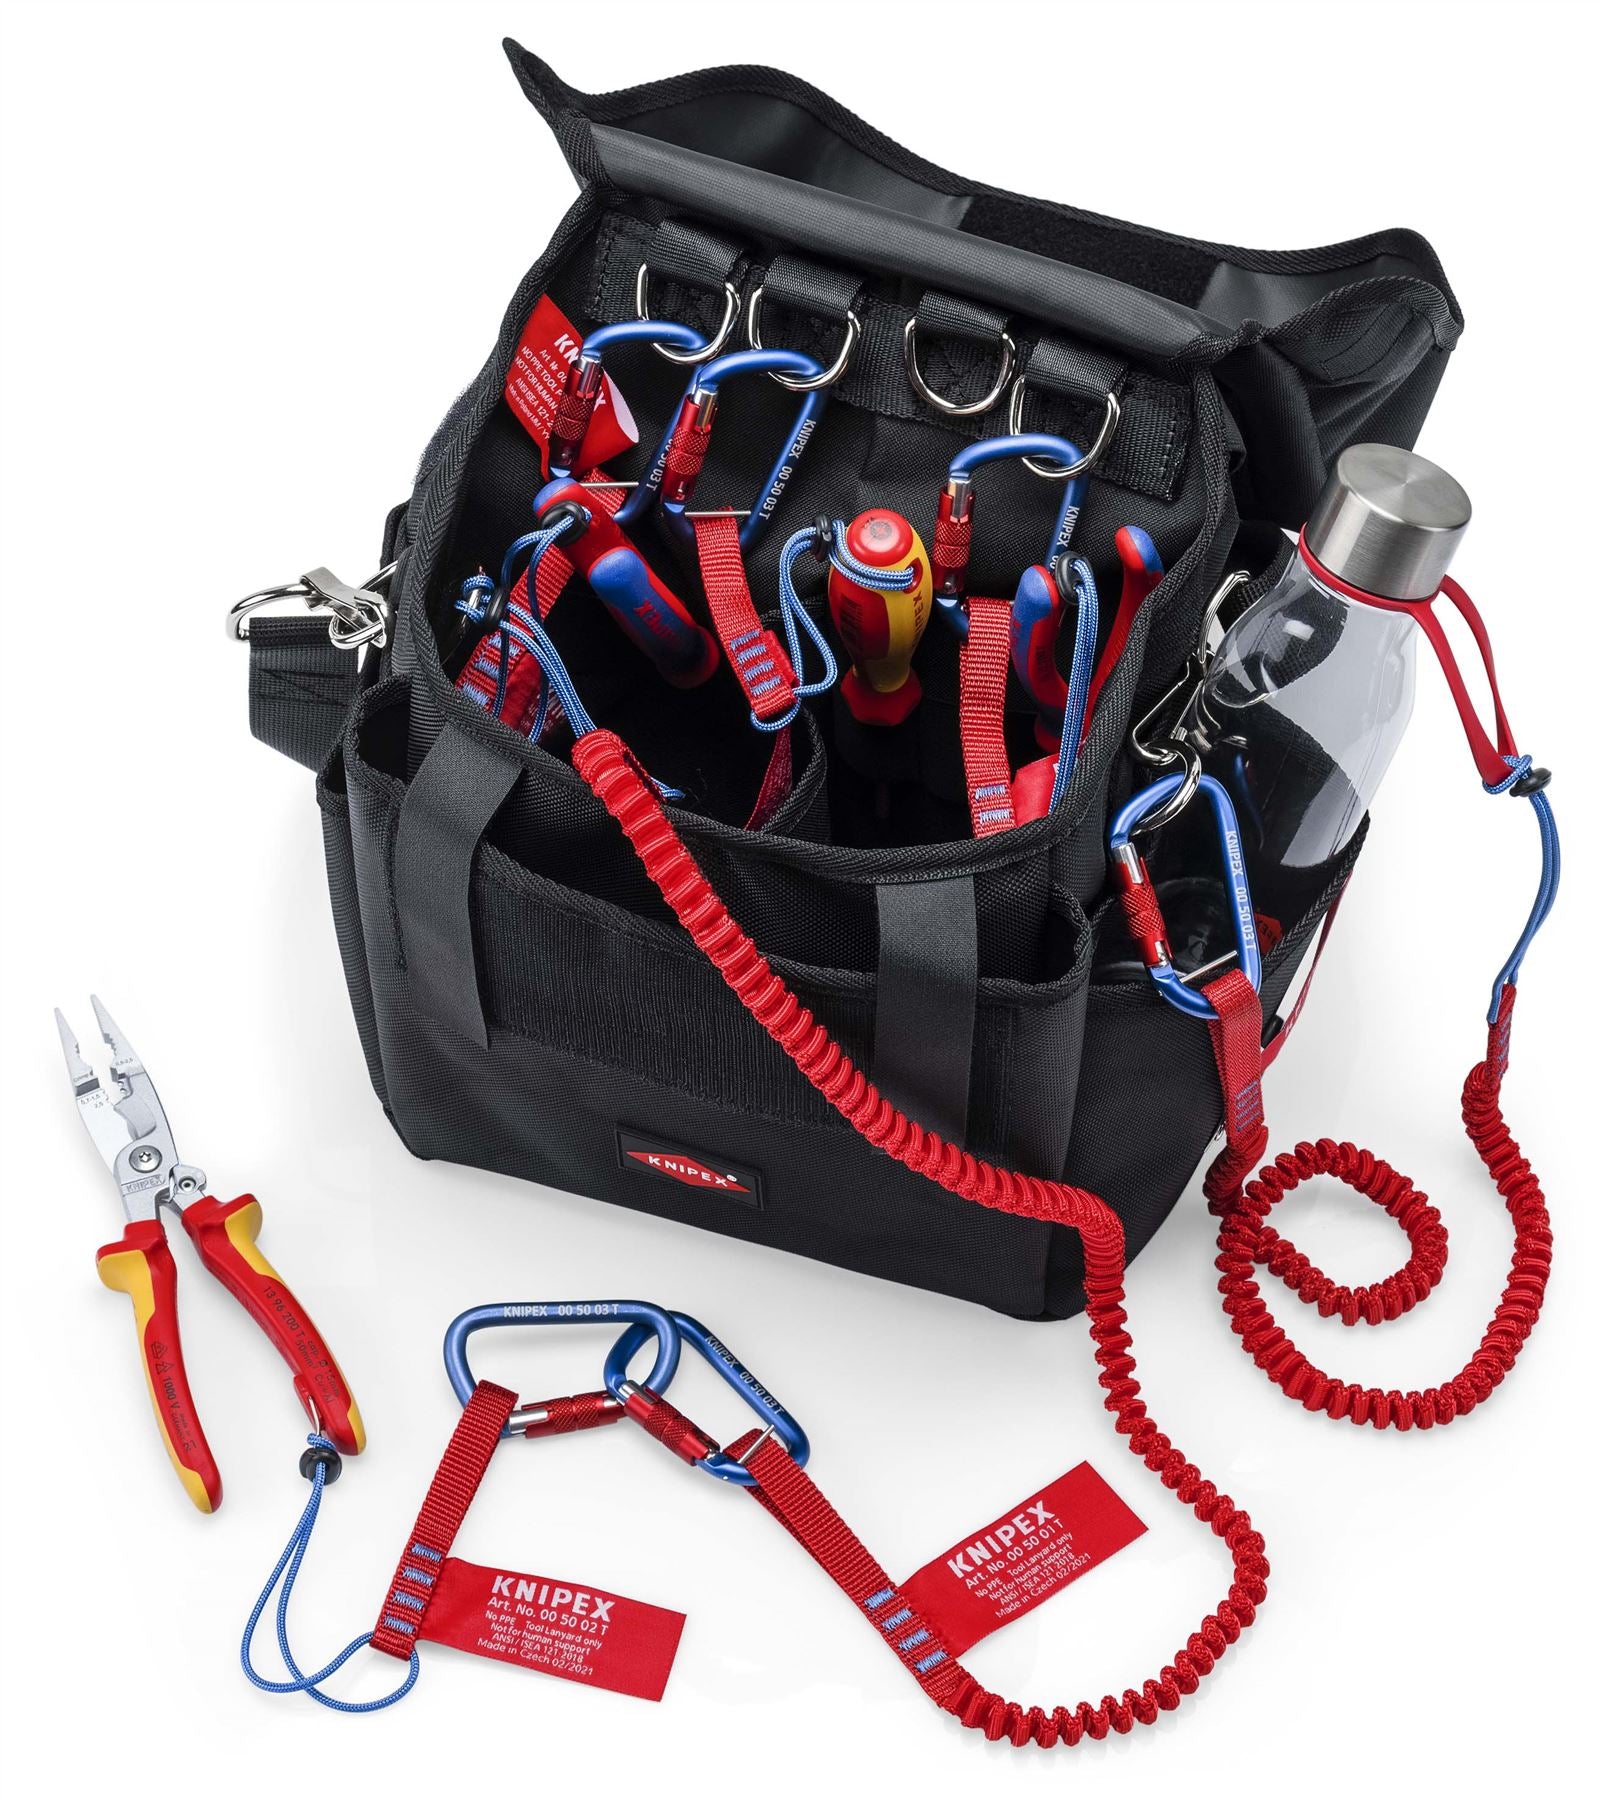 Knipex Tool Bag Case for Working at Heights Small 370 x 250 x 150mm 00 50 50 T LE